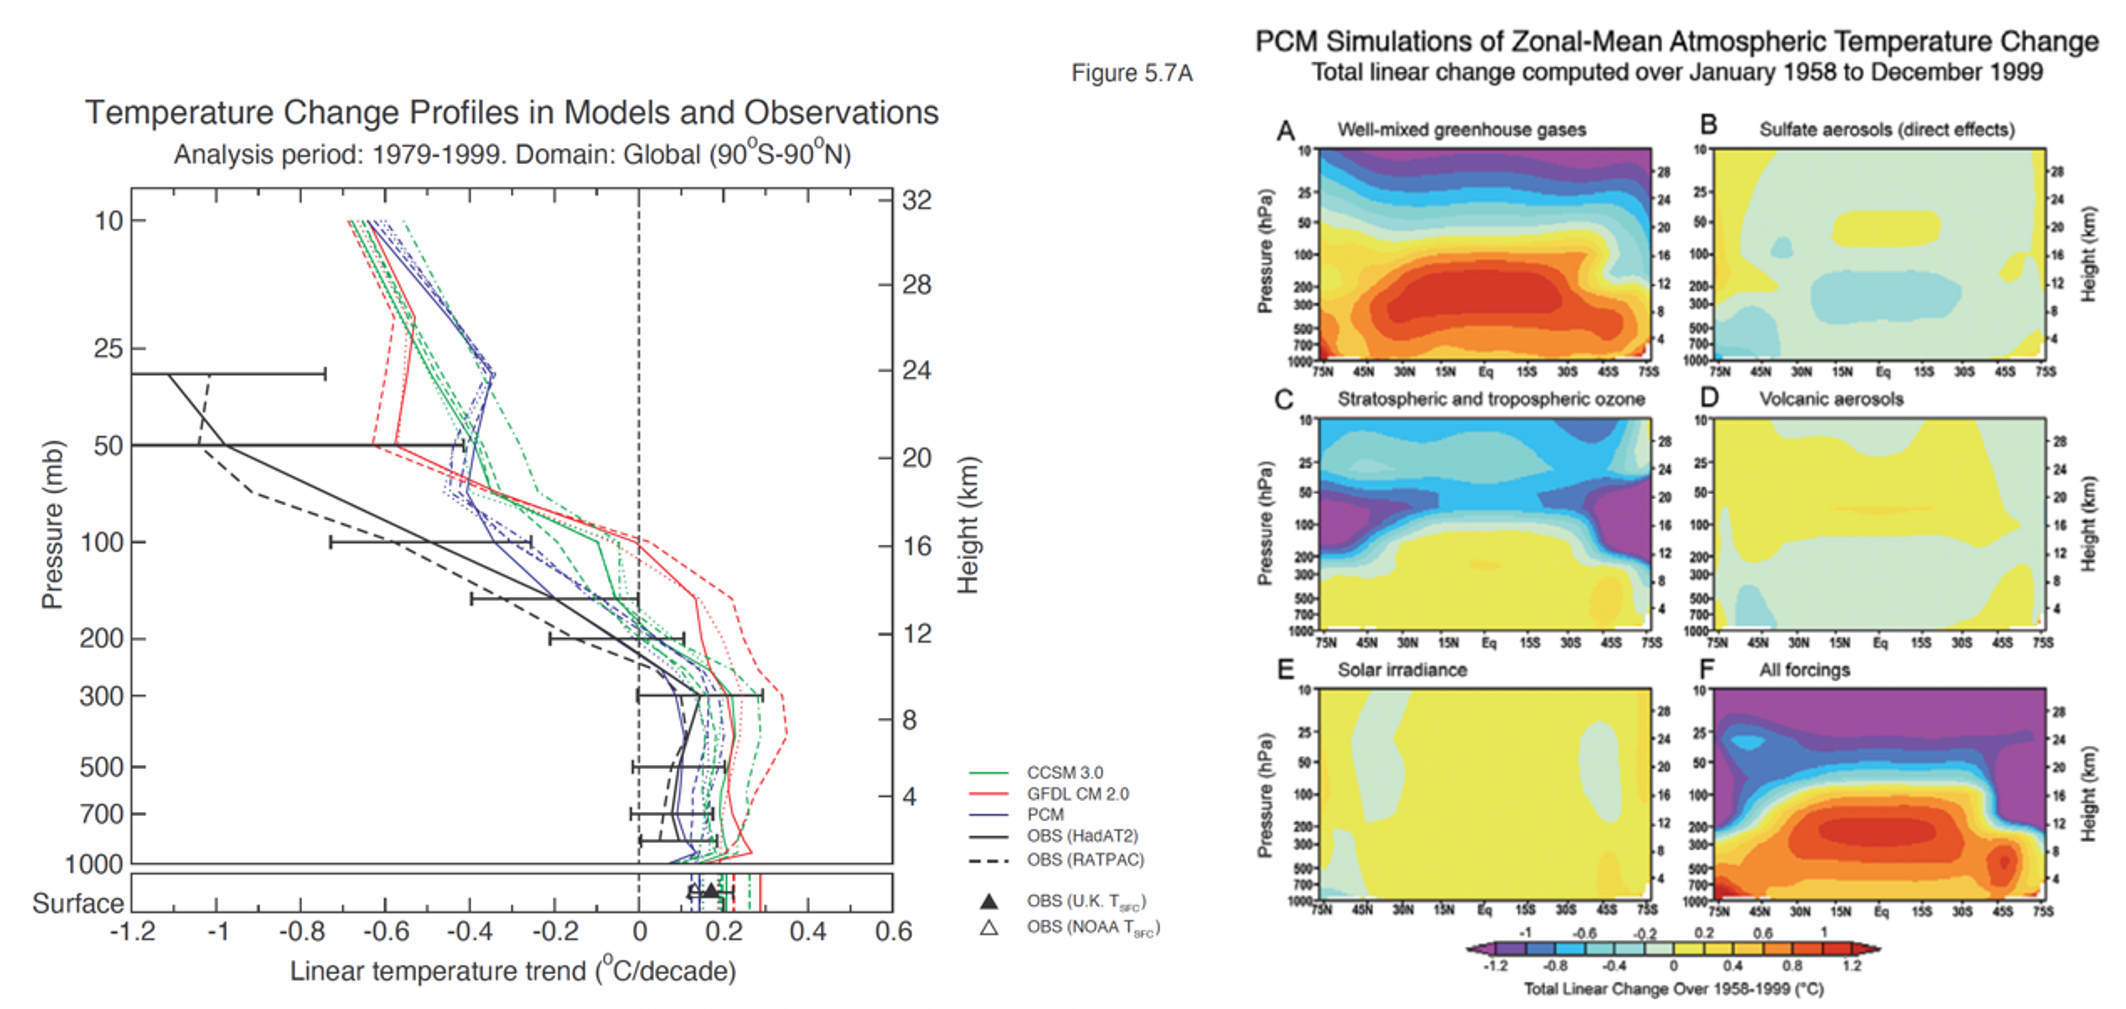 Graphs of temperature change profiles (left) and simulations of external forcing factors (right)